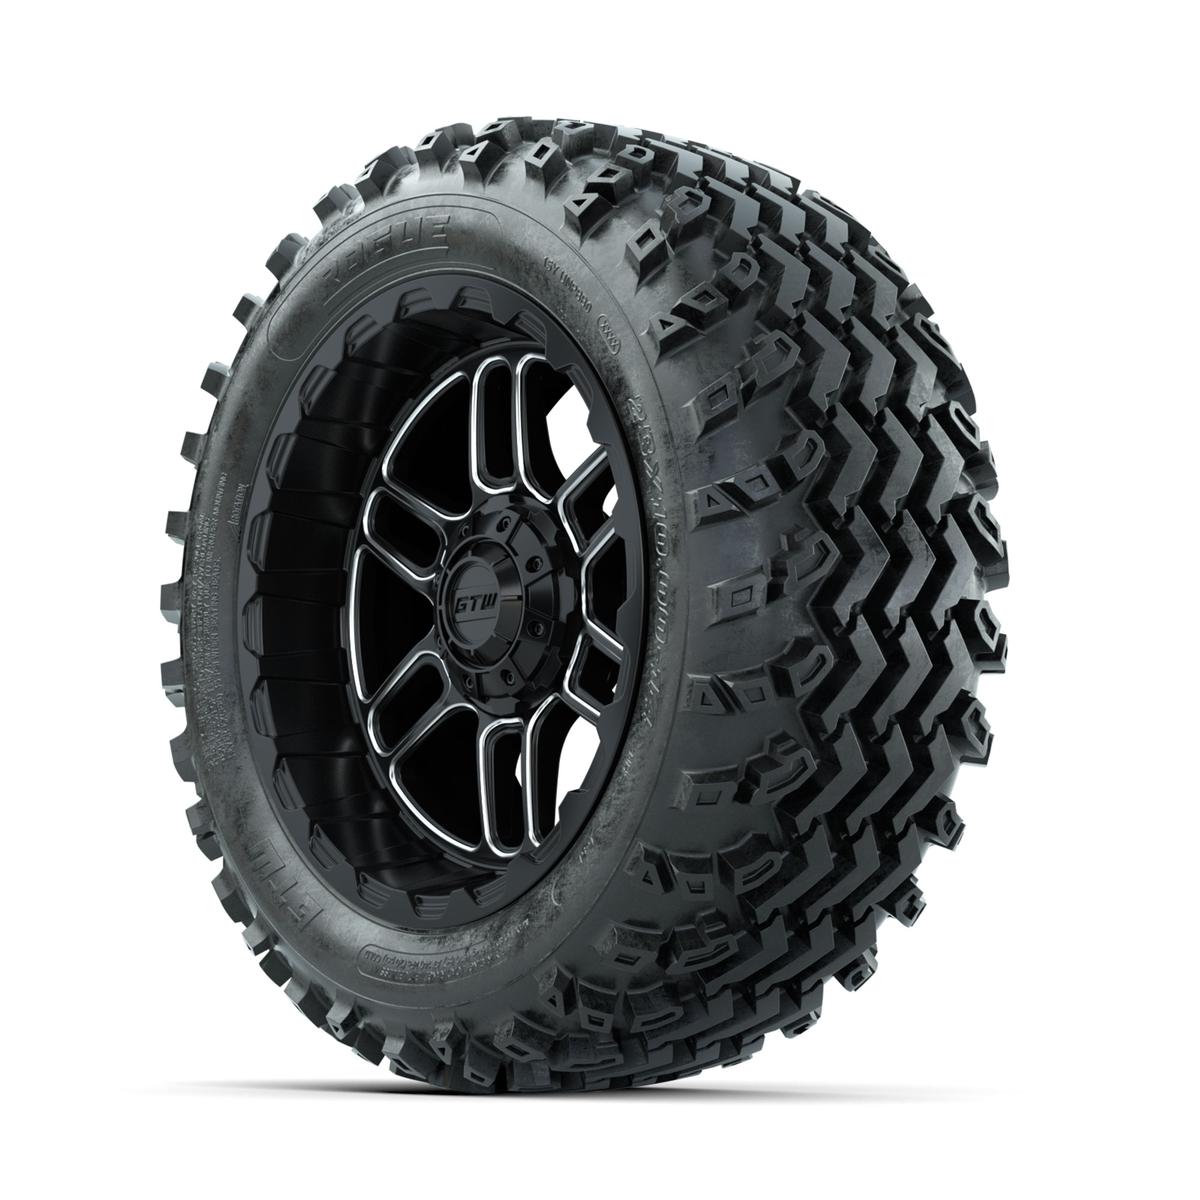 GTW Titan Machined/Black 14 in Wheels with 23x10.00-14 Rogue All Terrain Tires – Full Set